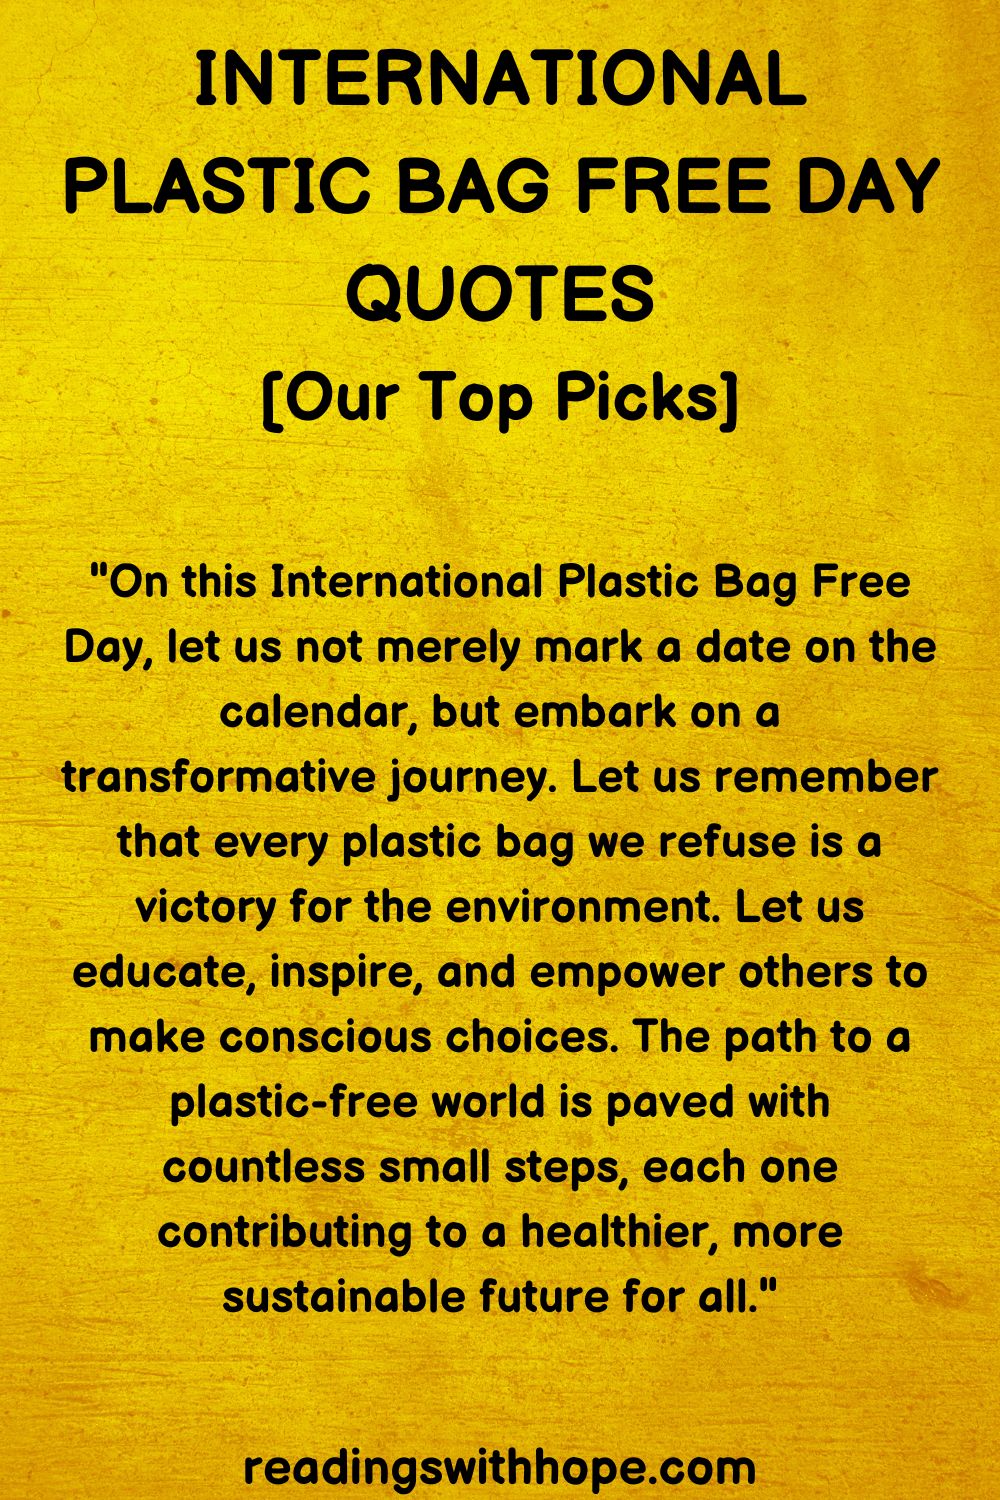 35 International Plastic Bag Free Day Quotes